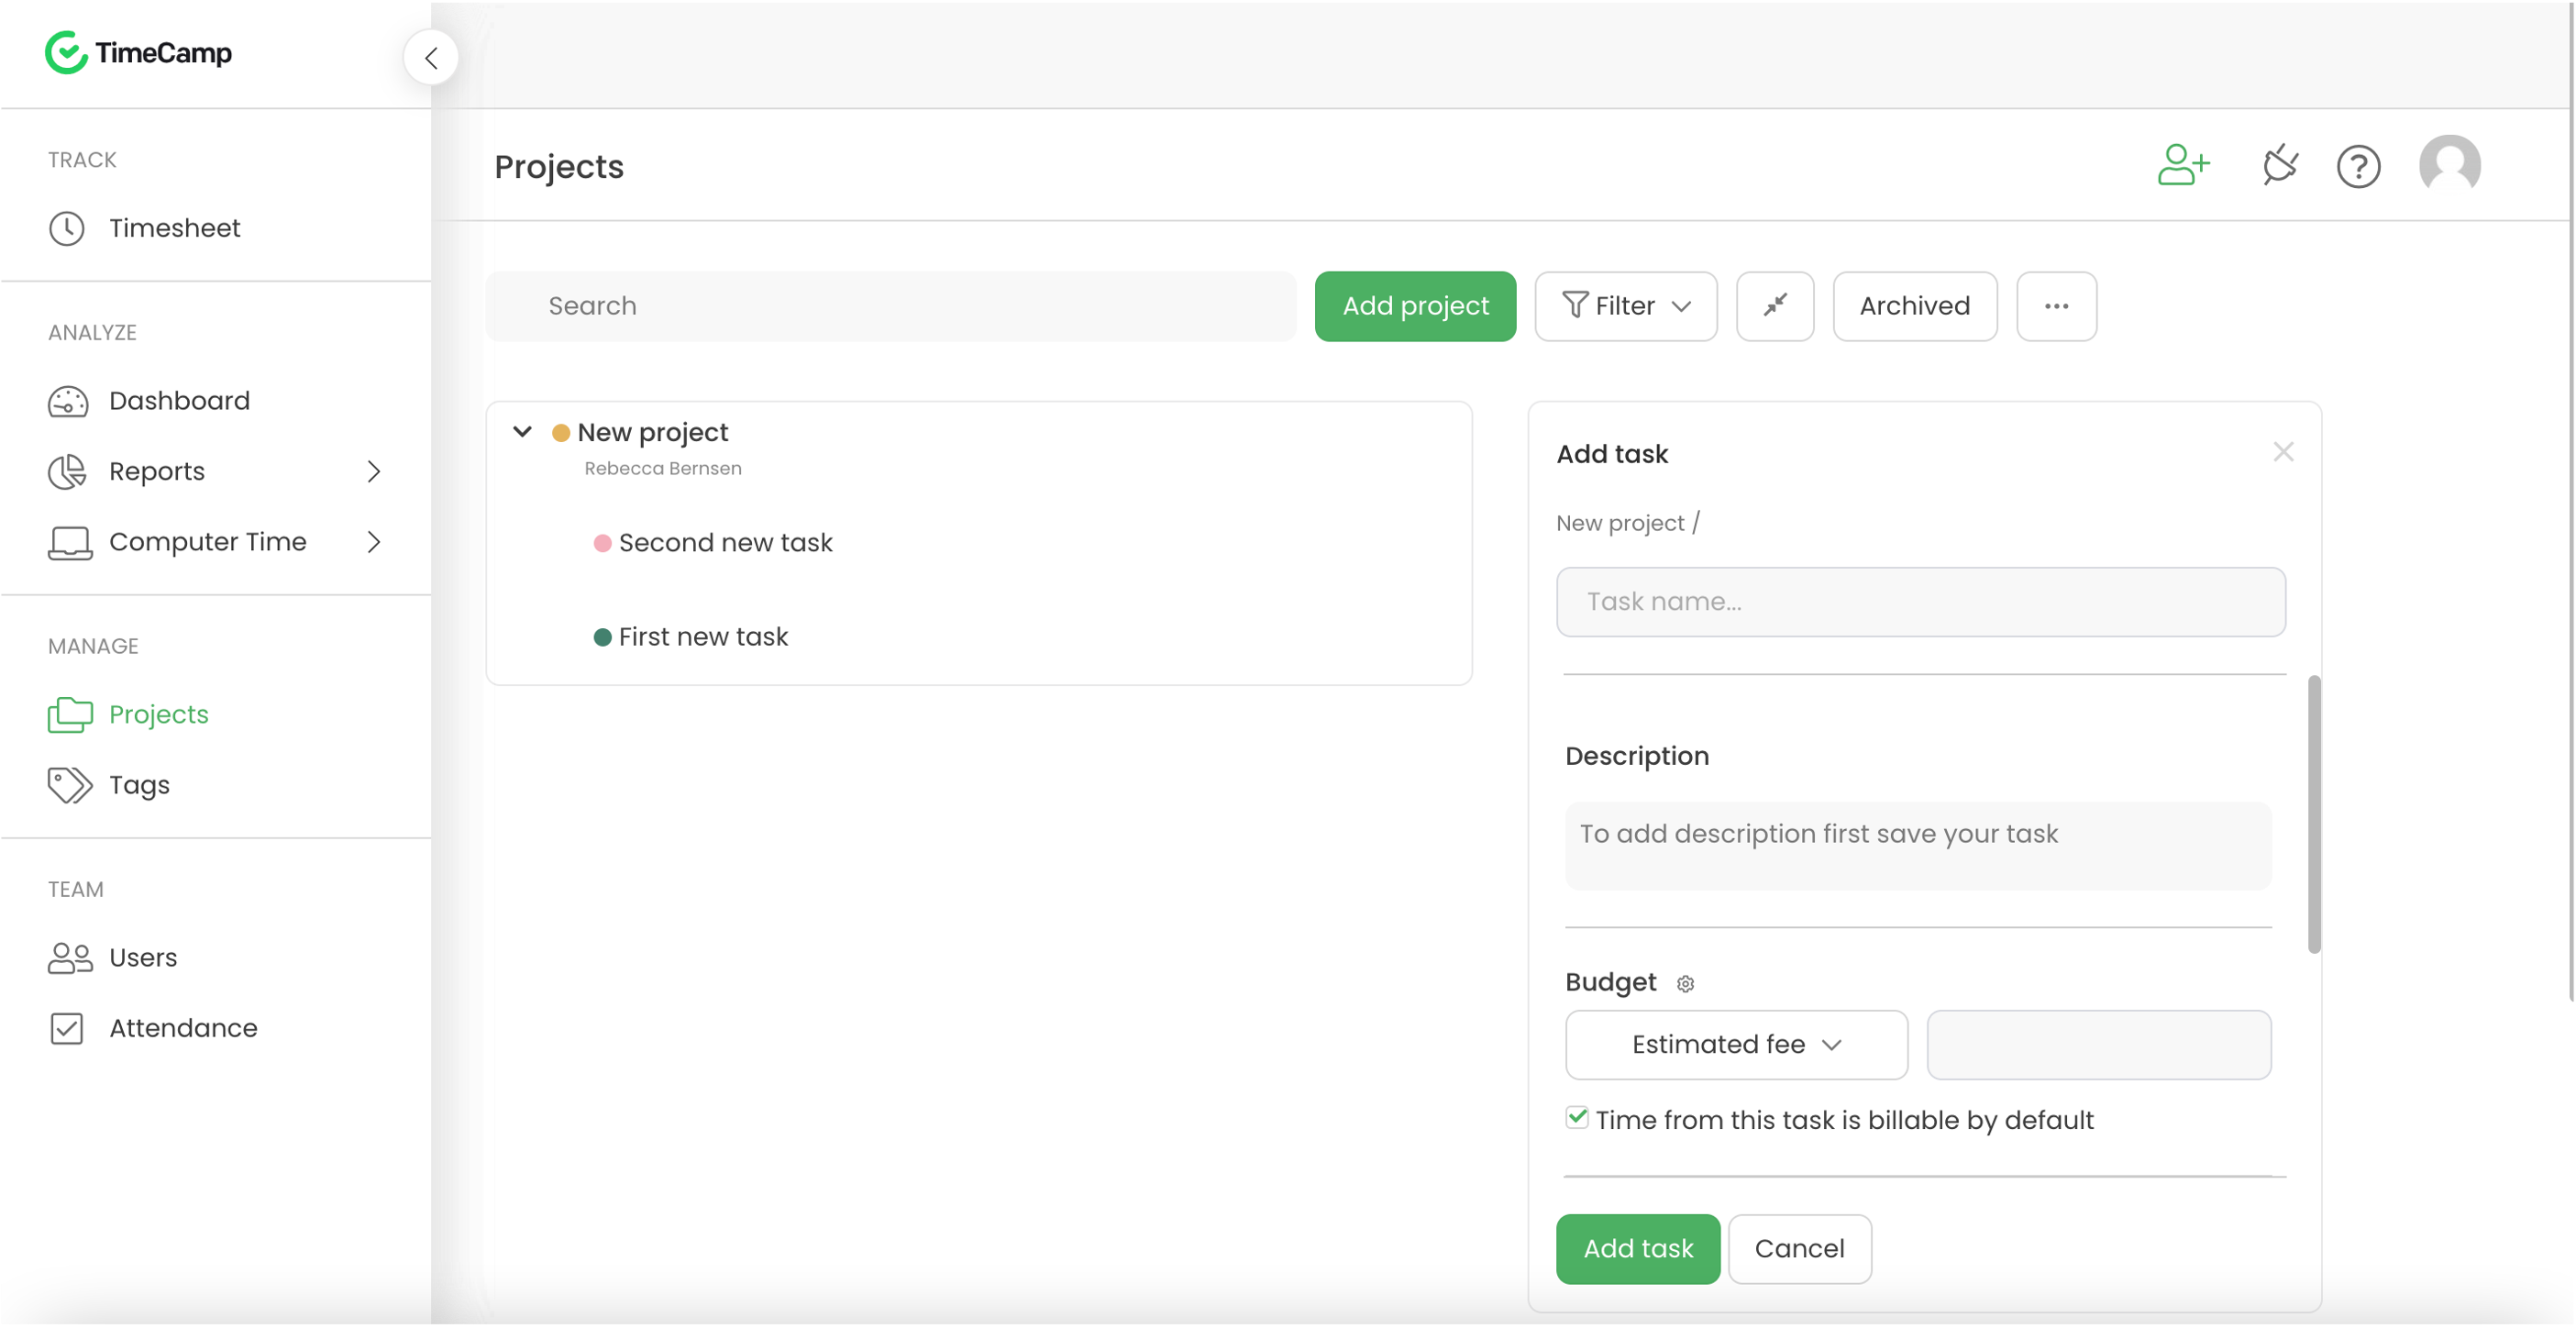 TimeCamp account with a new project which shows 2 tasks